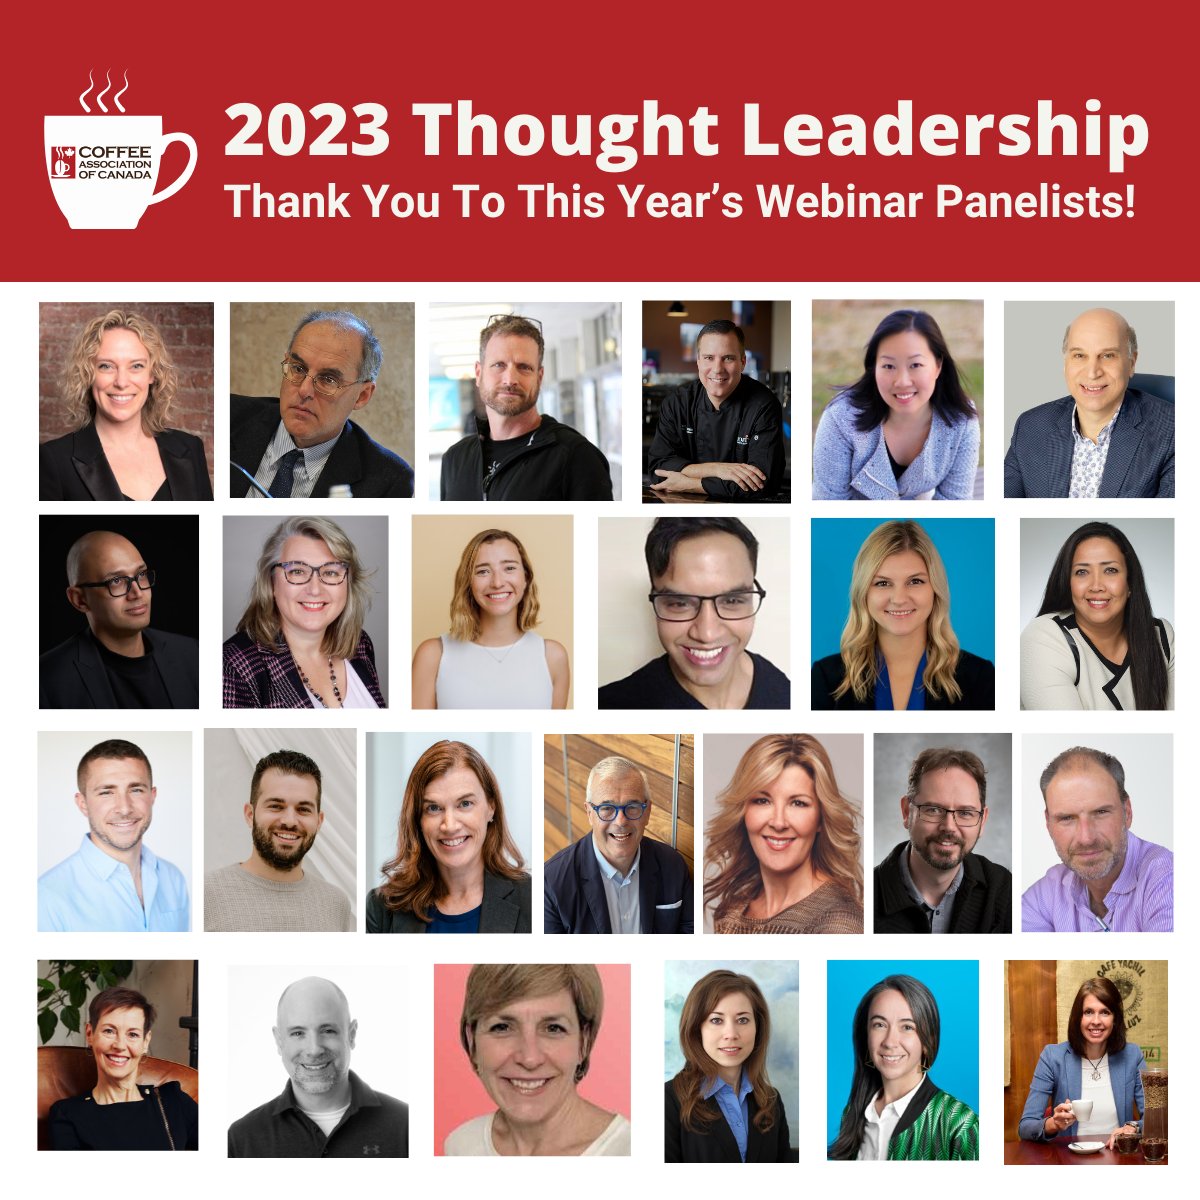 Thank you to all of our panelists who shared their expertise this year! Join us today at noon (EST) for our final webinar of 2023 on future #coffee #trends and #innovation with @Mintel, @Technomic and @nourishfoodmark. Register for today's webinar: coffeeassoc.com/webinars/ready…